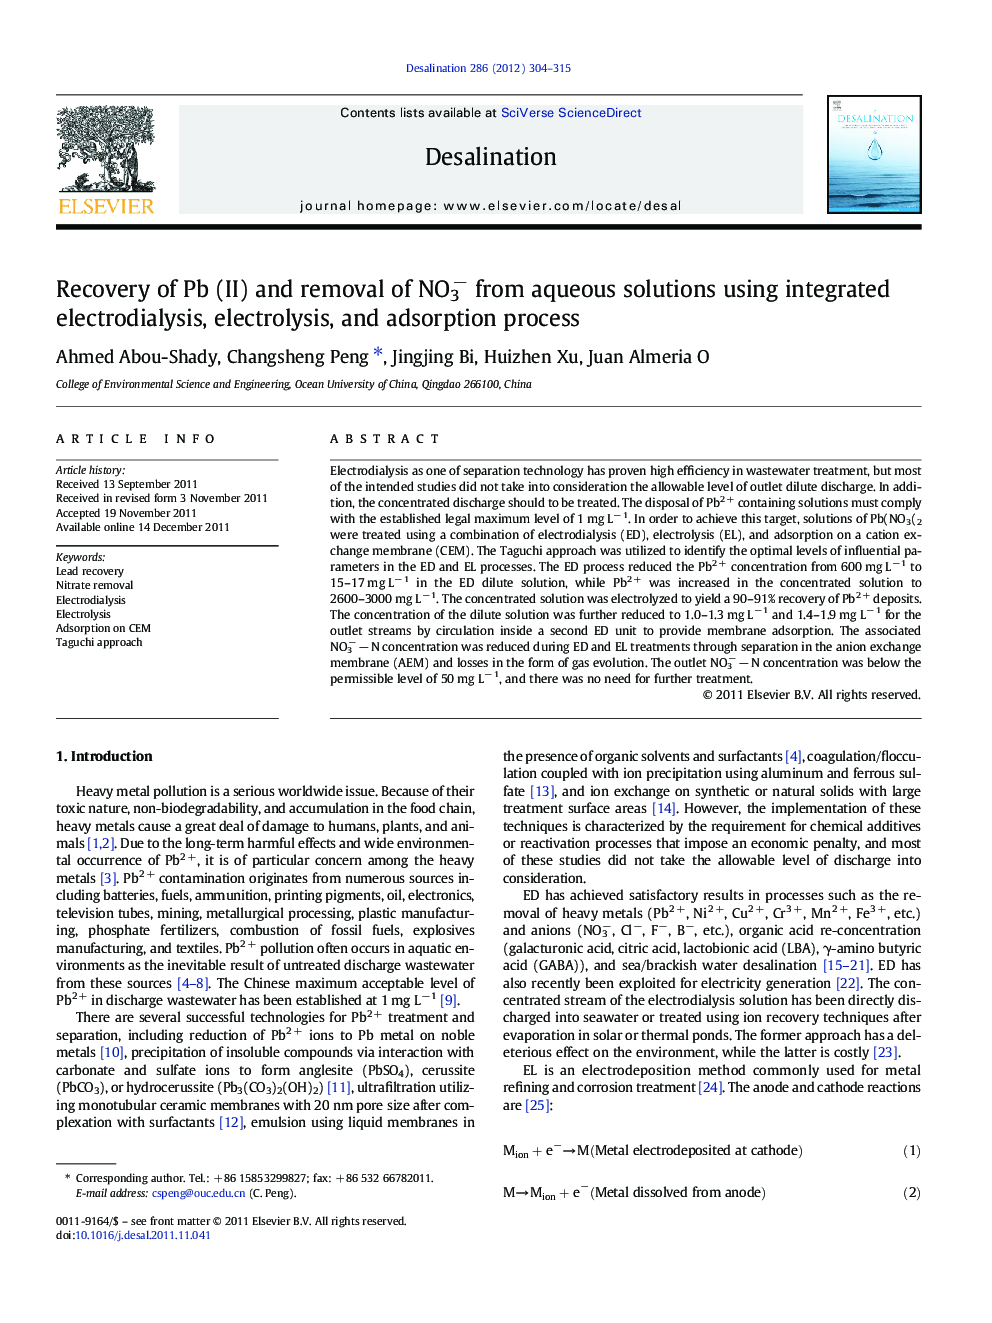 Recovery of Pb (II) and removal of NO3− from aqueous solutions using integrated electrodialysis, electrolysis, and adsorption process